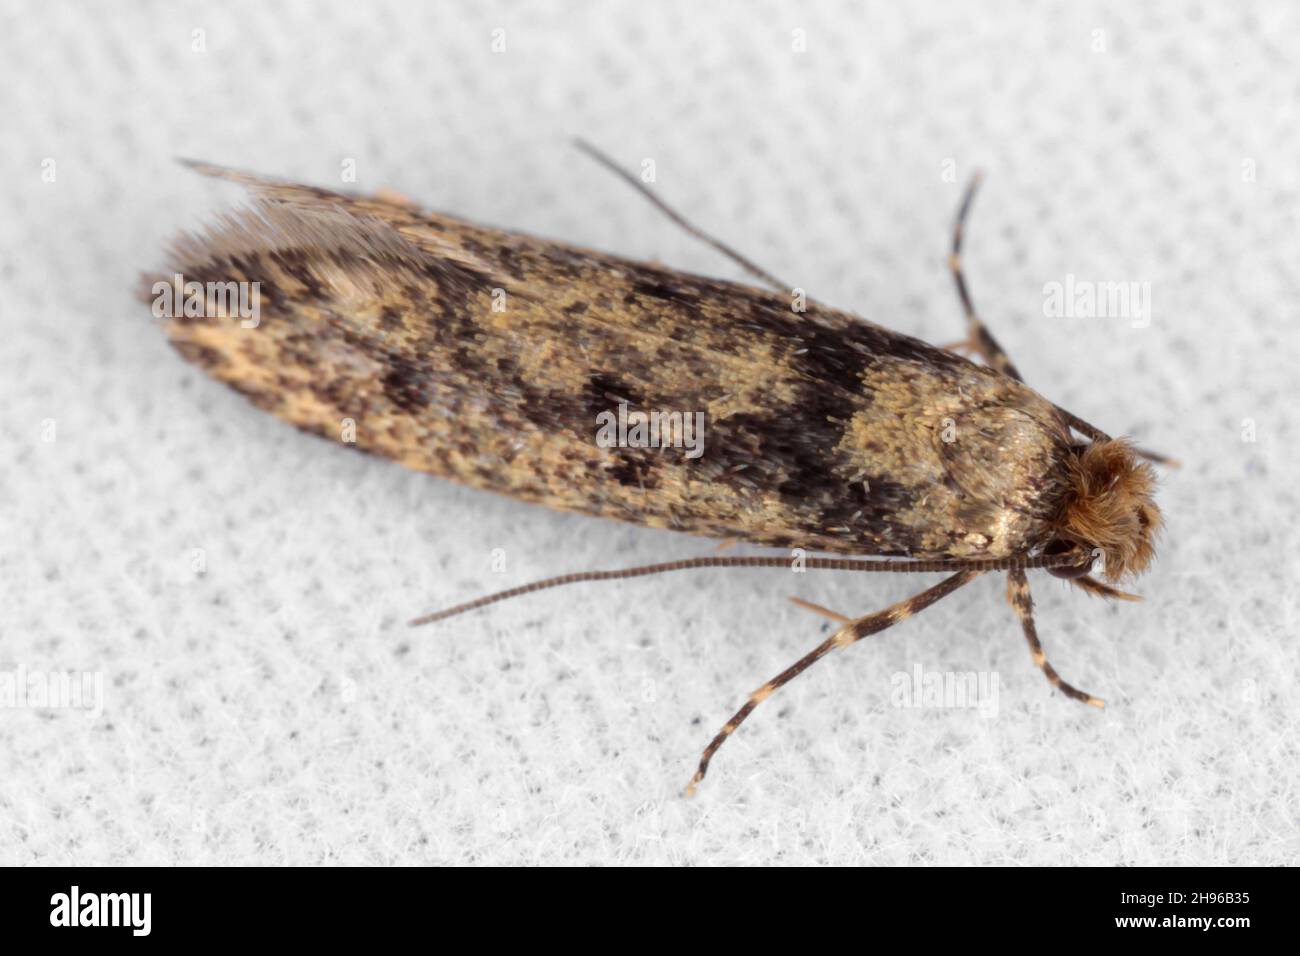 The brown-dotted clothes moth Niditinea fuscella is a species of tineoid moth. It belongs to the fungus moth family Tineidae. Common house moth. Stock Photo